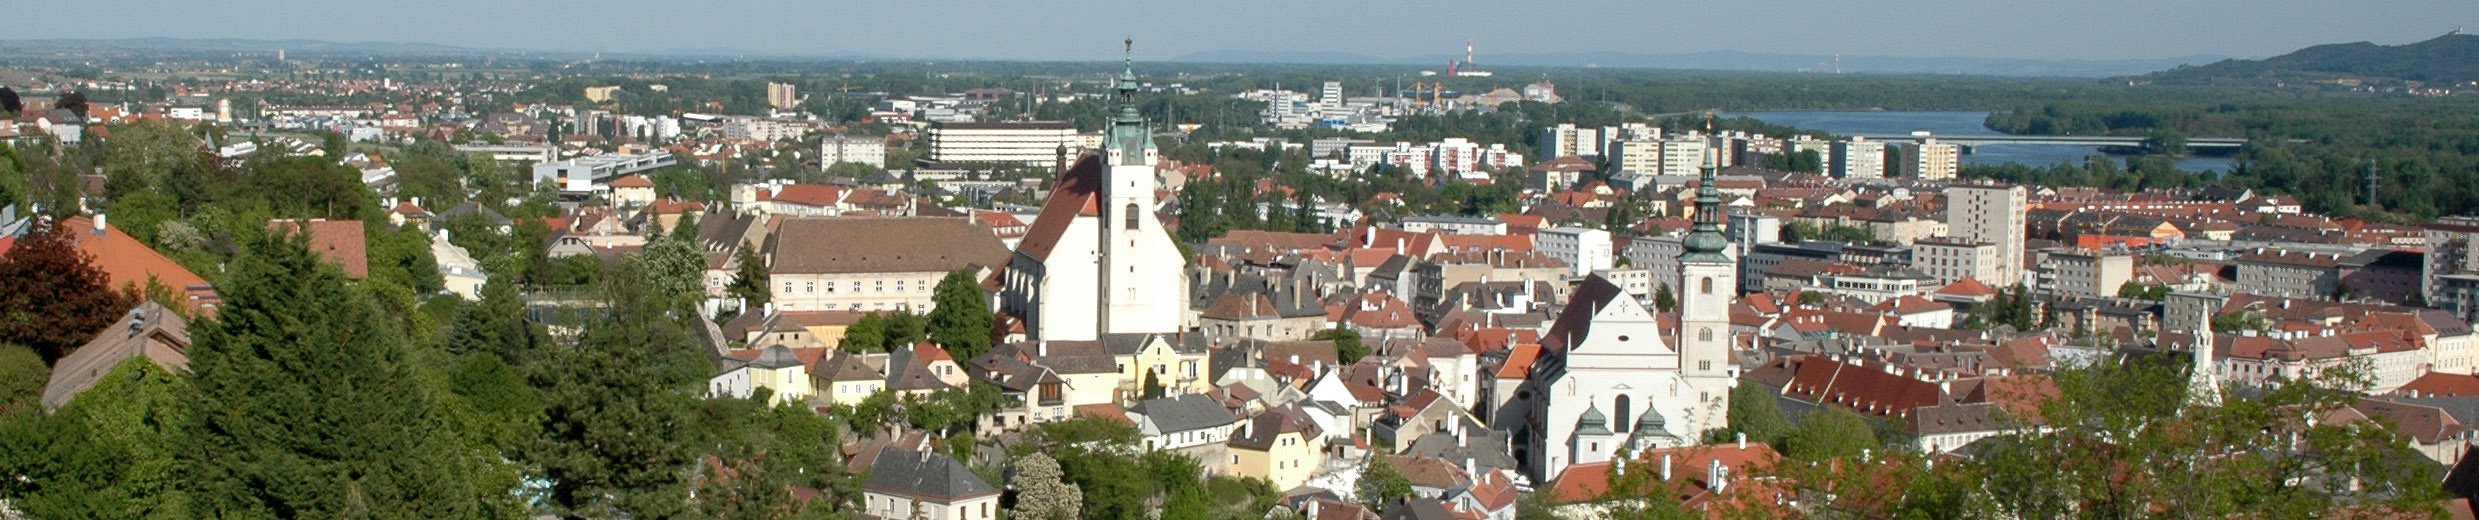 The Town of Krems